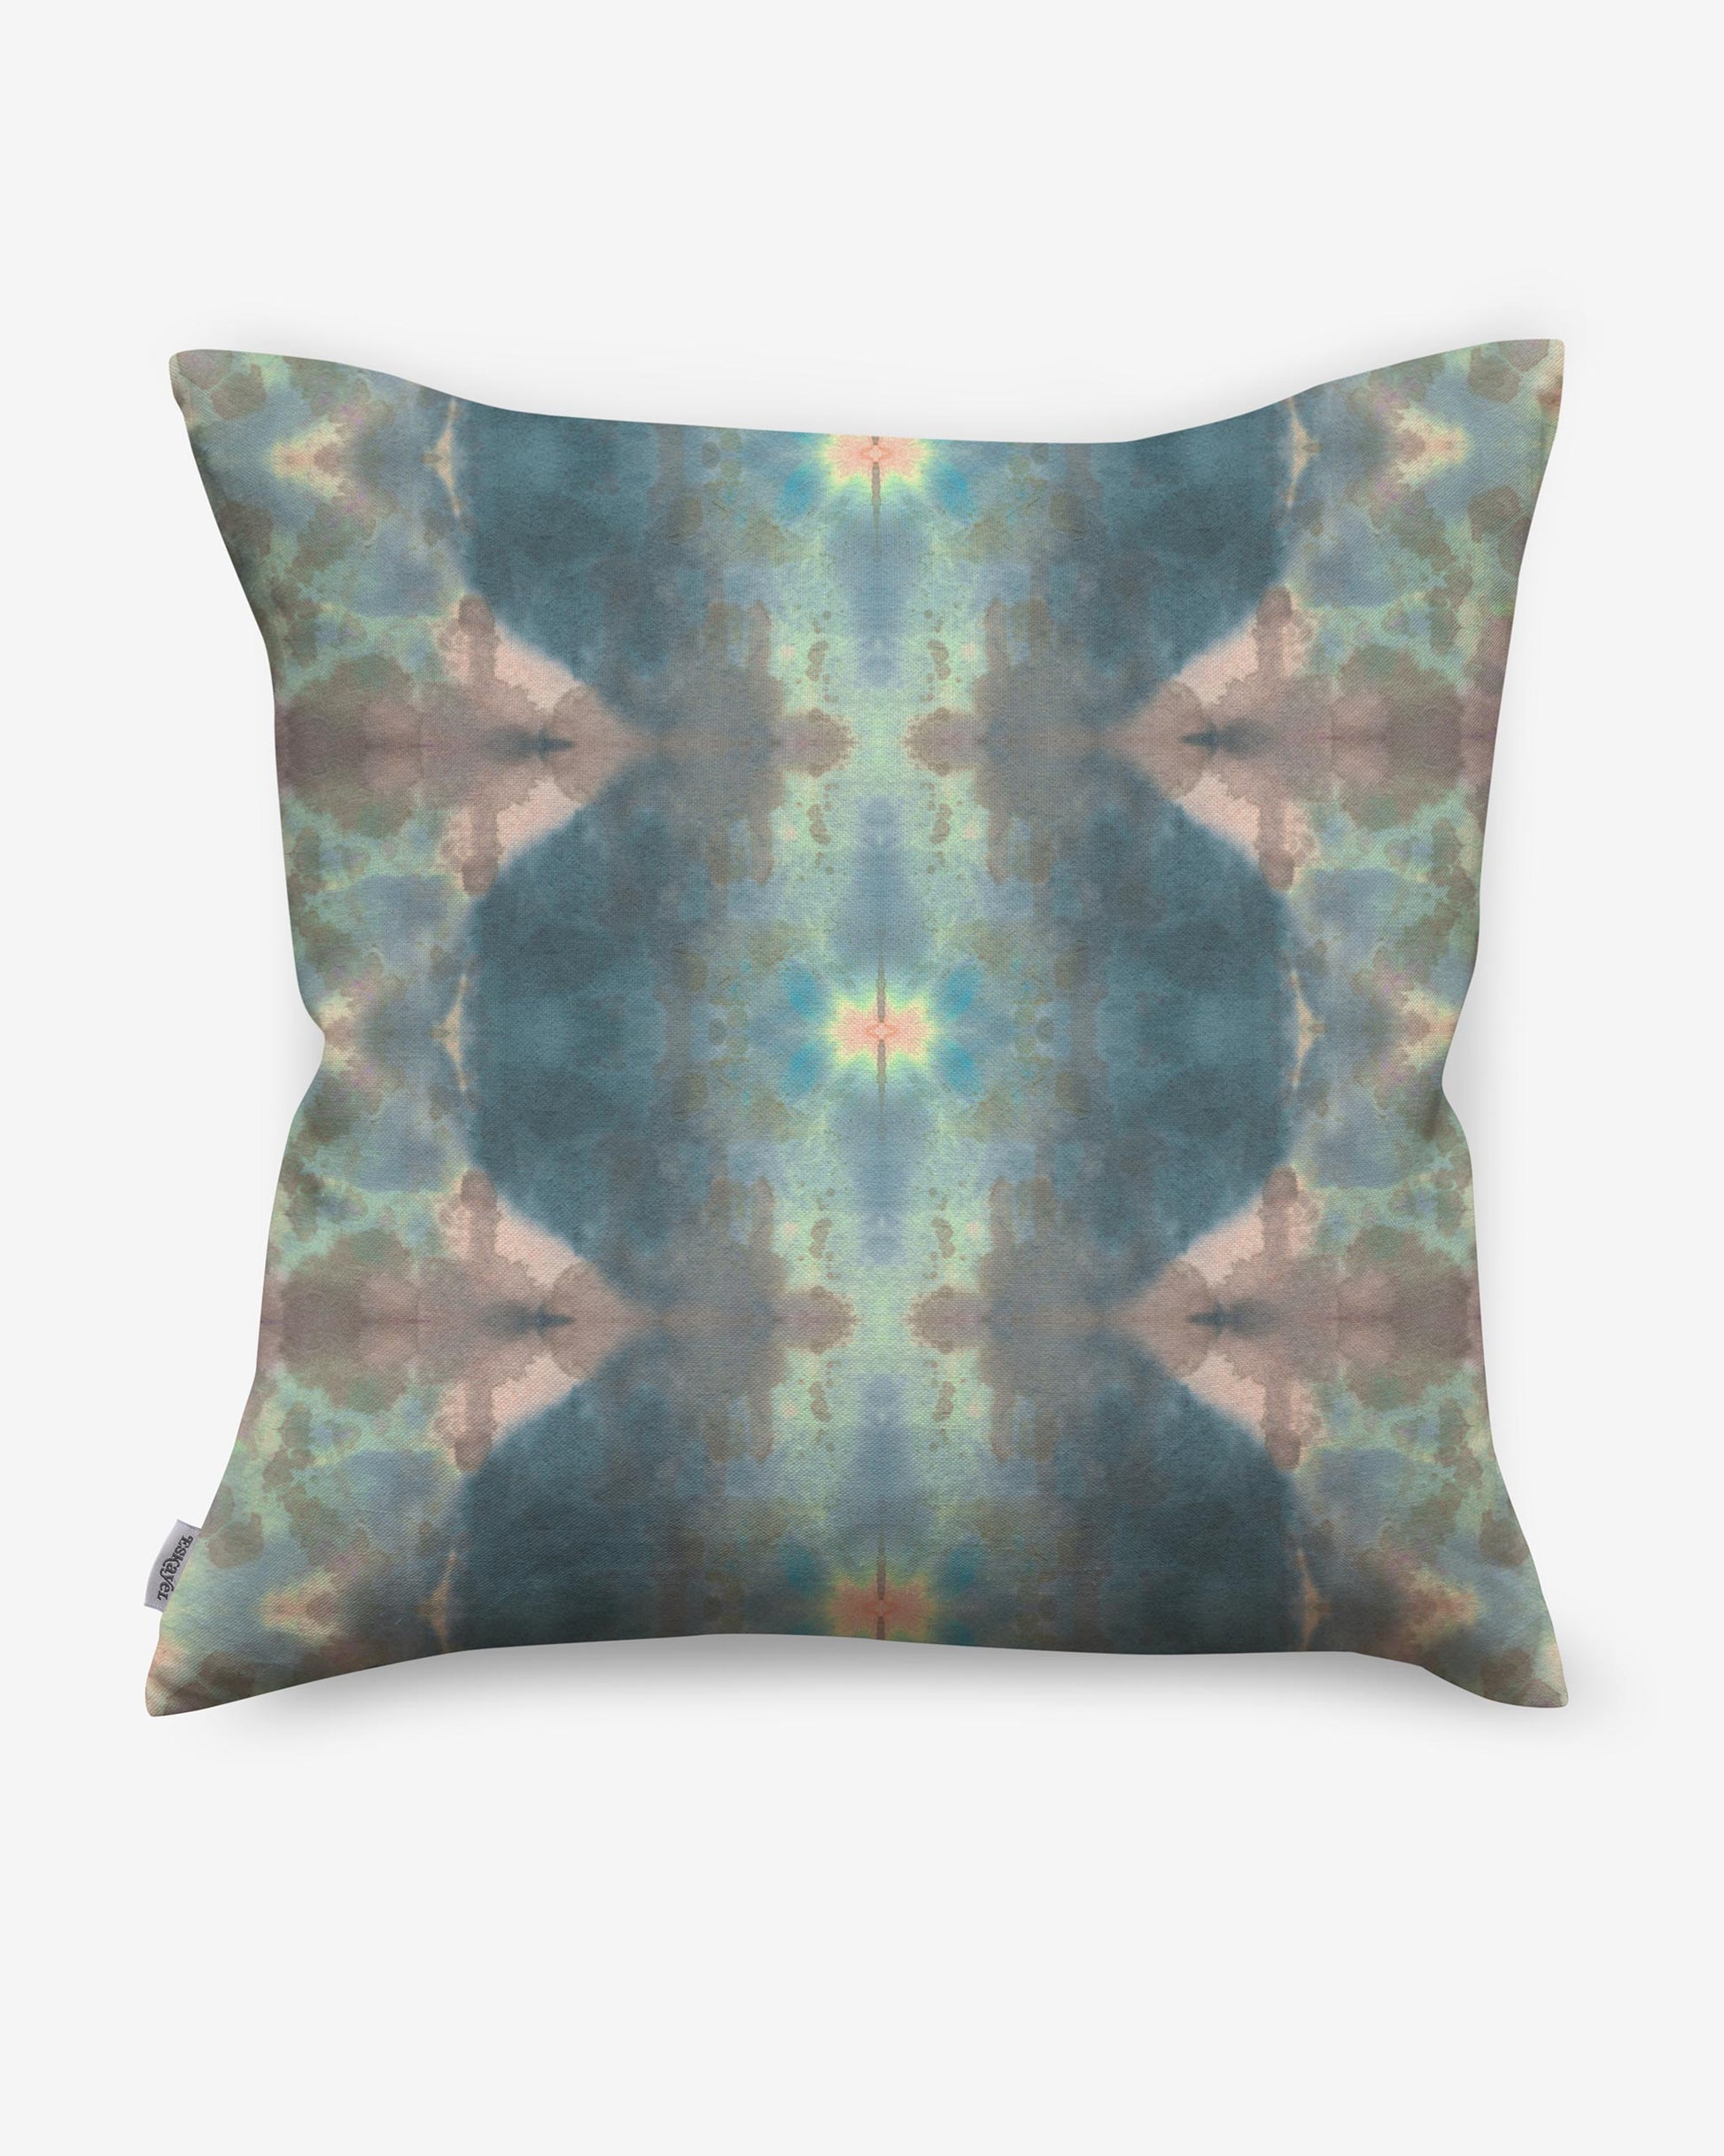 A Jangala Pillow Citron with a jungle fabric pattern and a blue and green abstract design